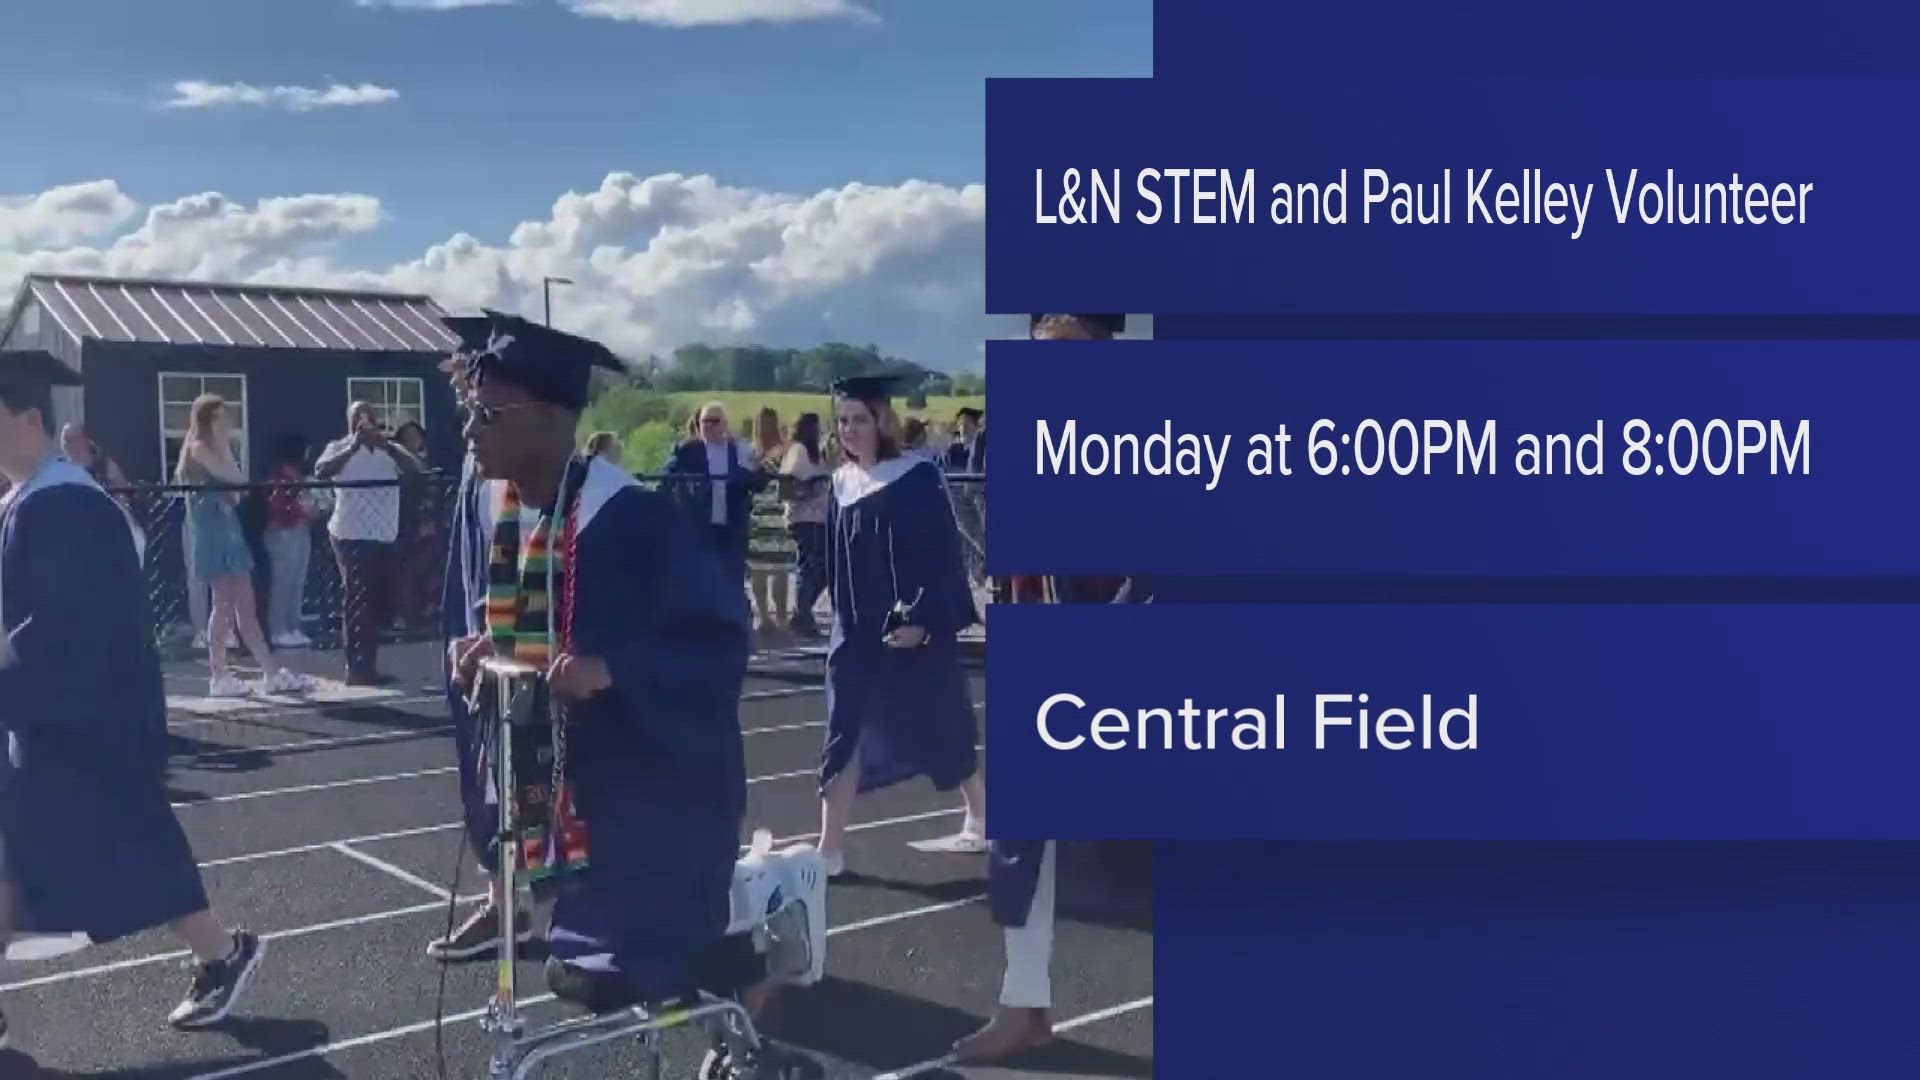 L&N STEM will have its graduation at 6 p.m. and Paul Kelley Volunteer Academies will have its graduation at 8 p.m. Both ceremonies will be at Central Field.